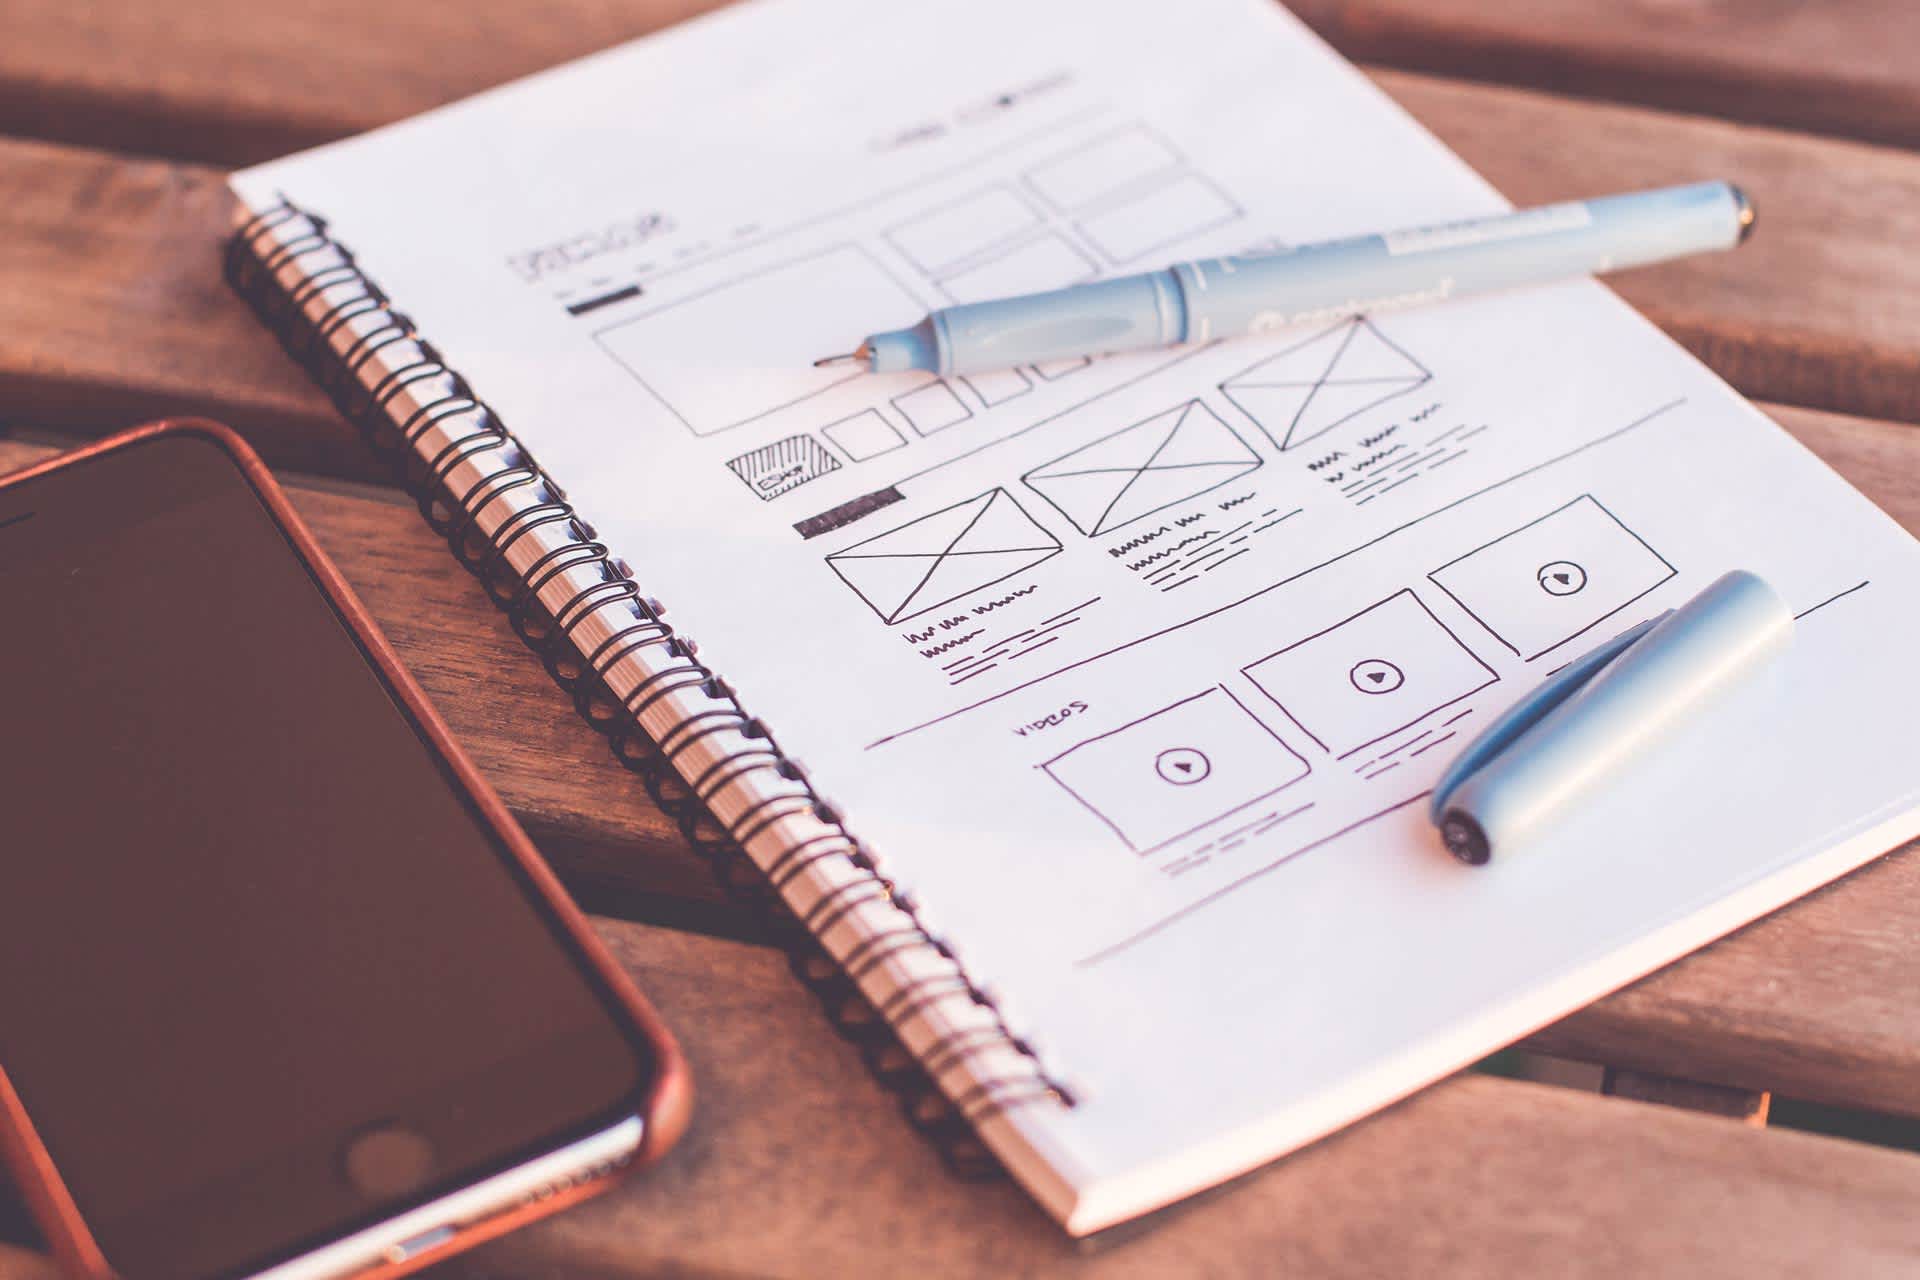 Notebook with drawings of app wireframes